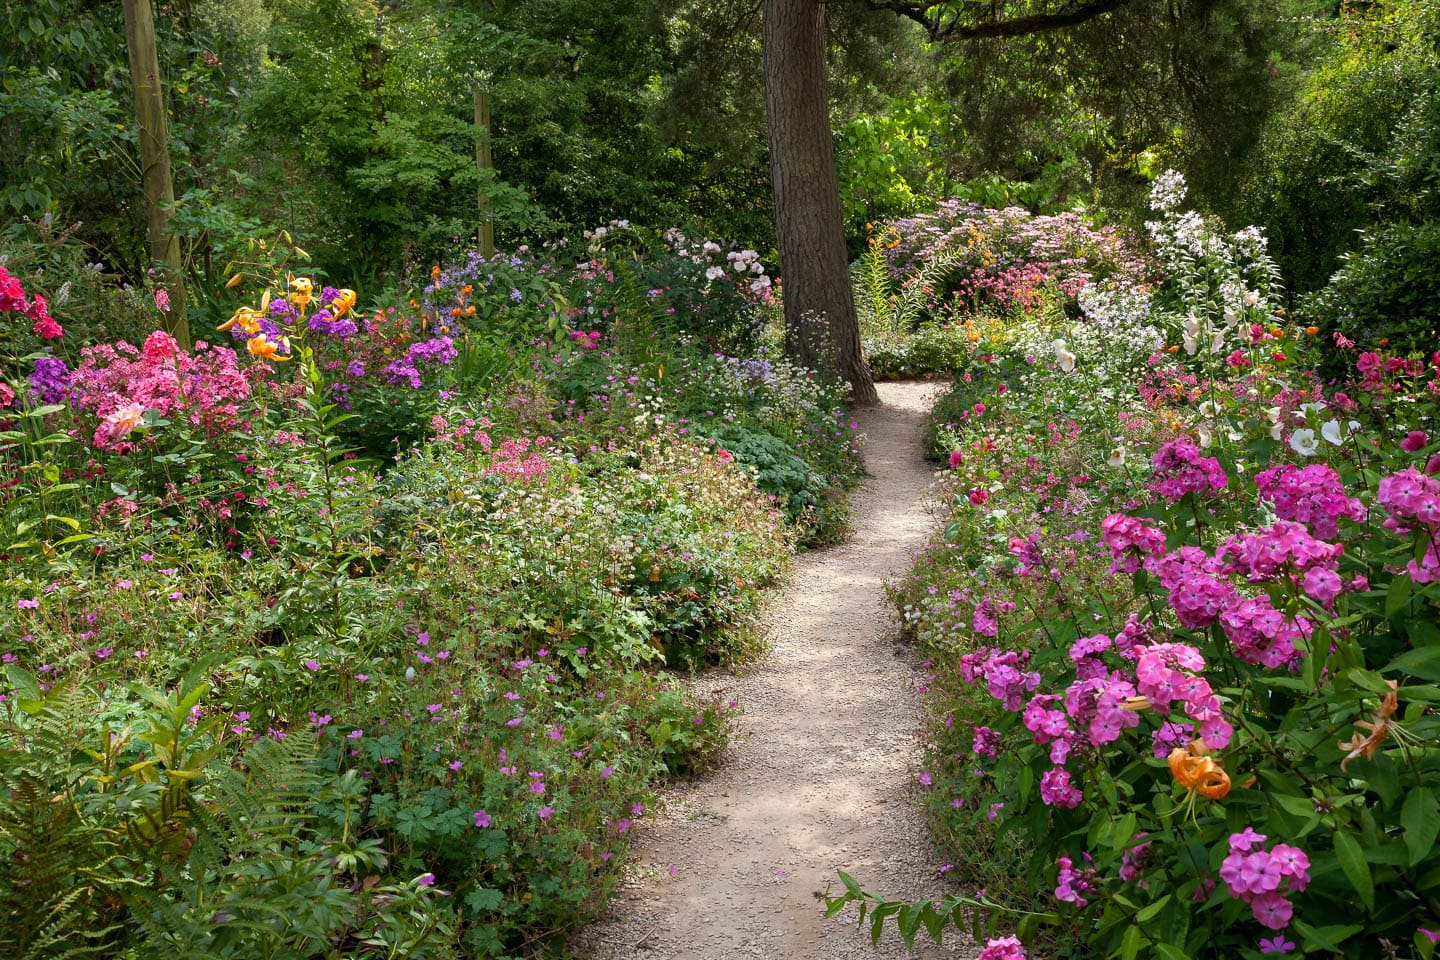 English cottage garden with a gravel path down the middle